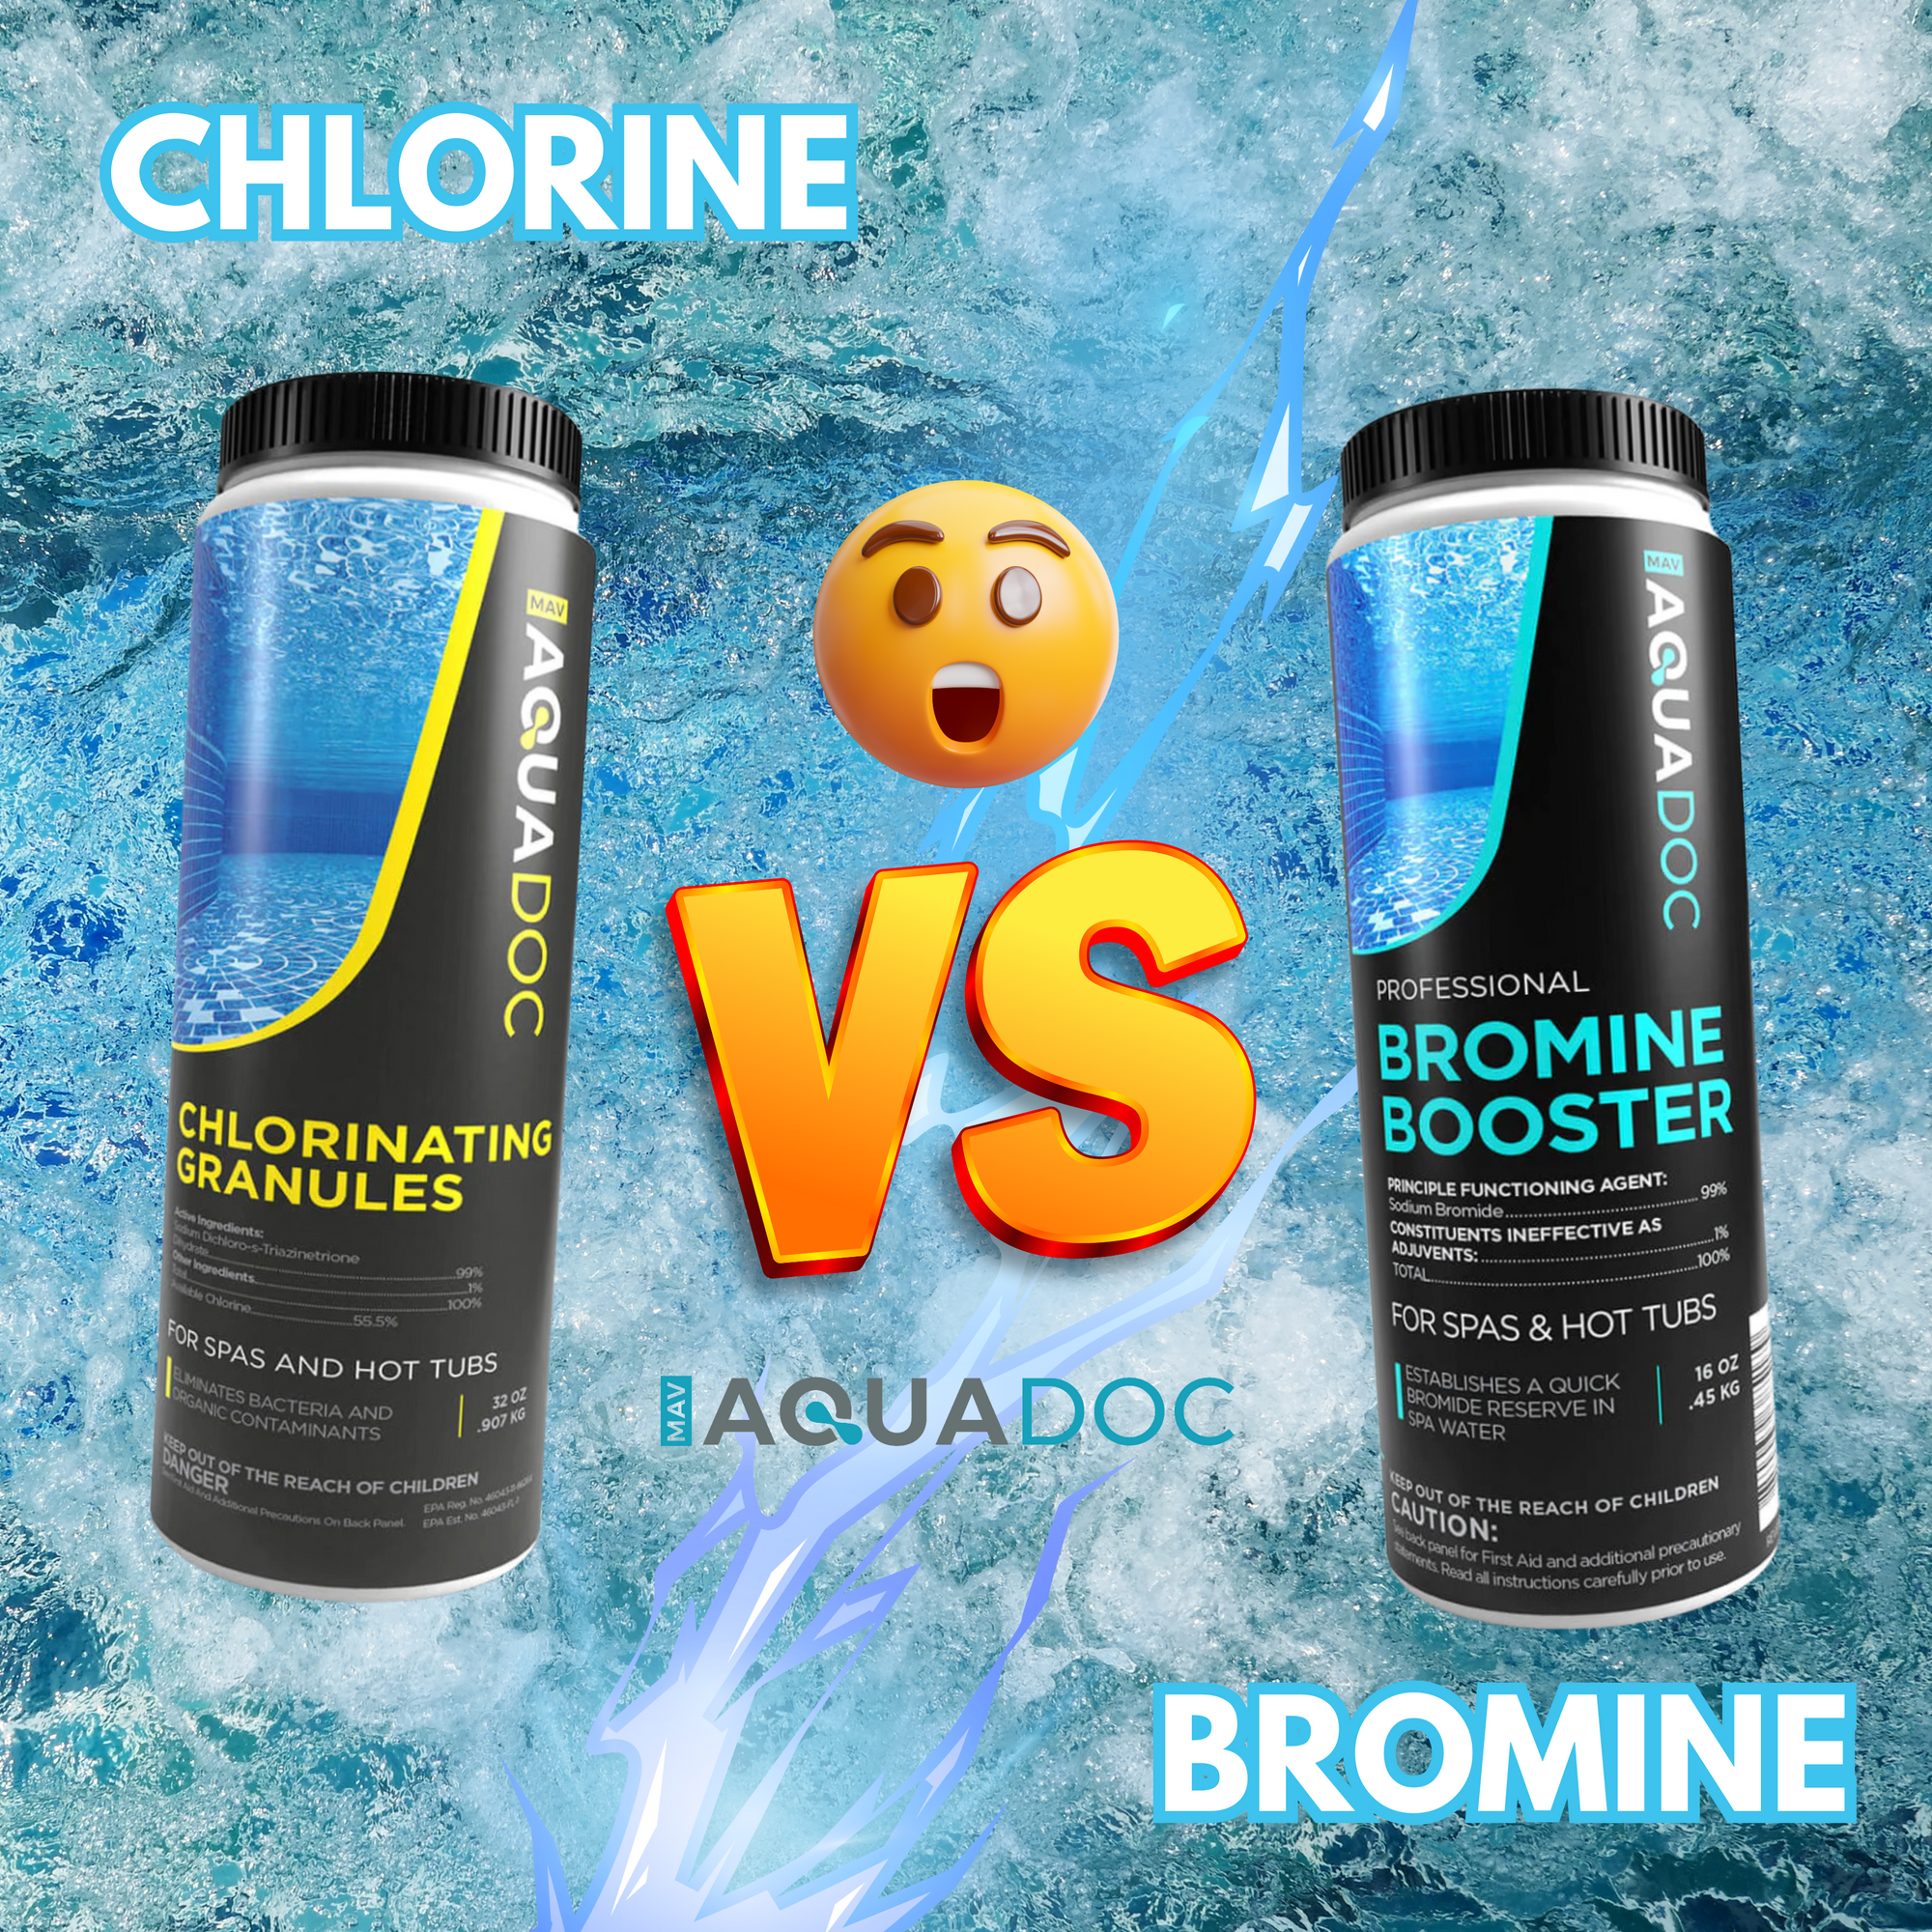  "Chlorine's punch vs. bromine's chill: Finding the perfect hot tub sanitizer personality for your spa haven.